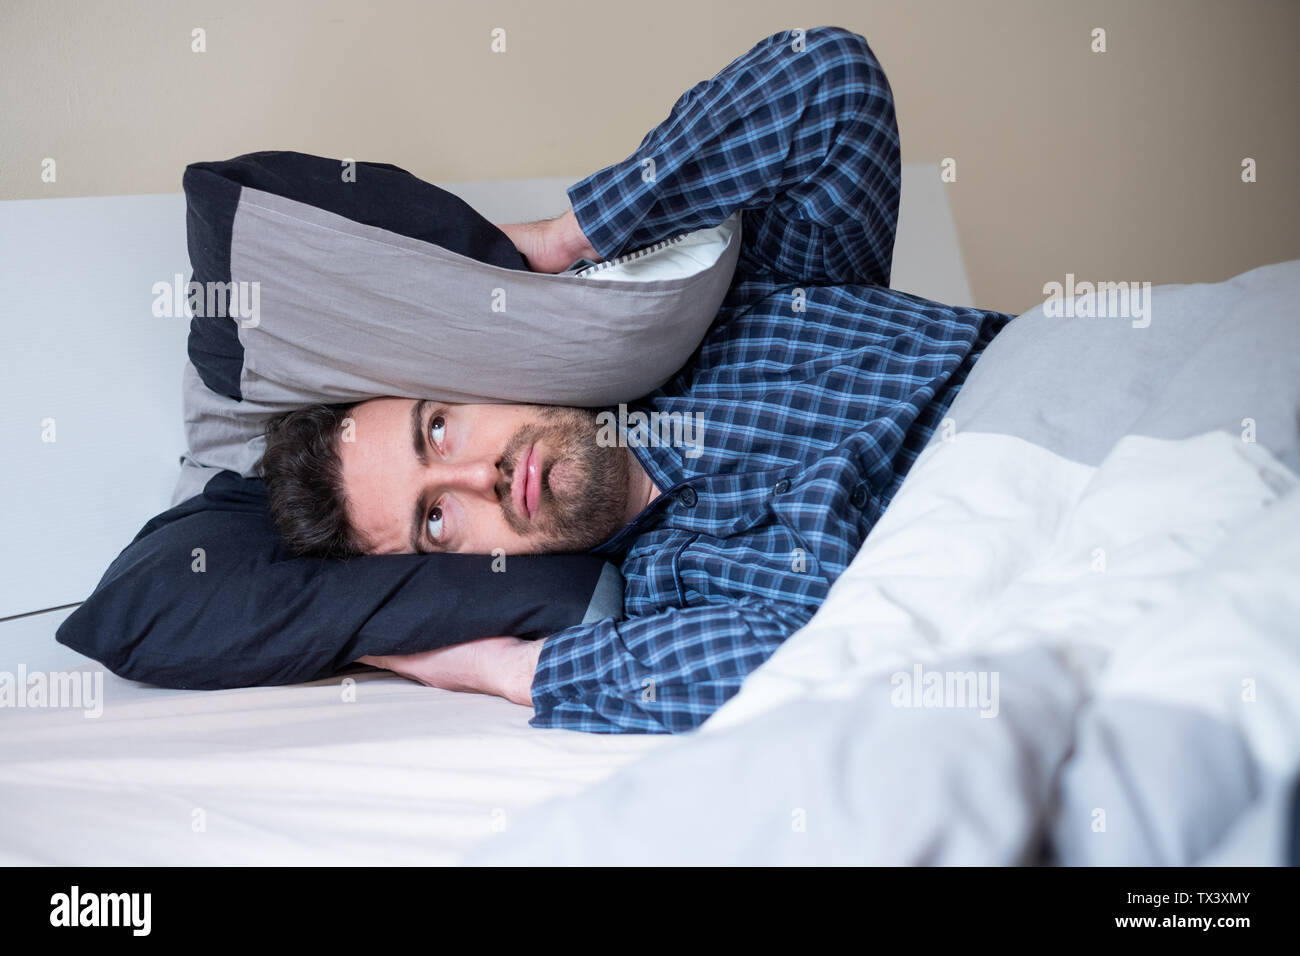 Man bothered by neighbor noise trying to sleep Stock Photo